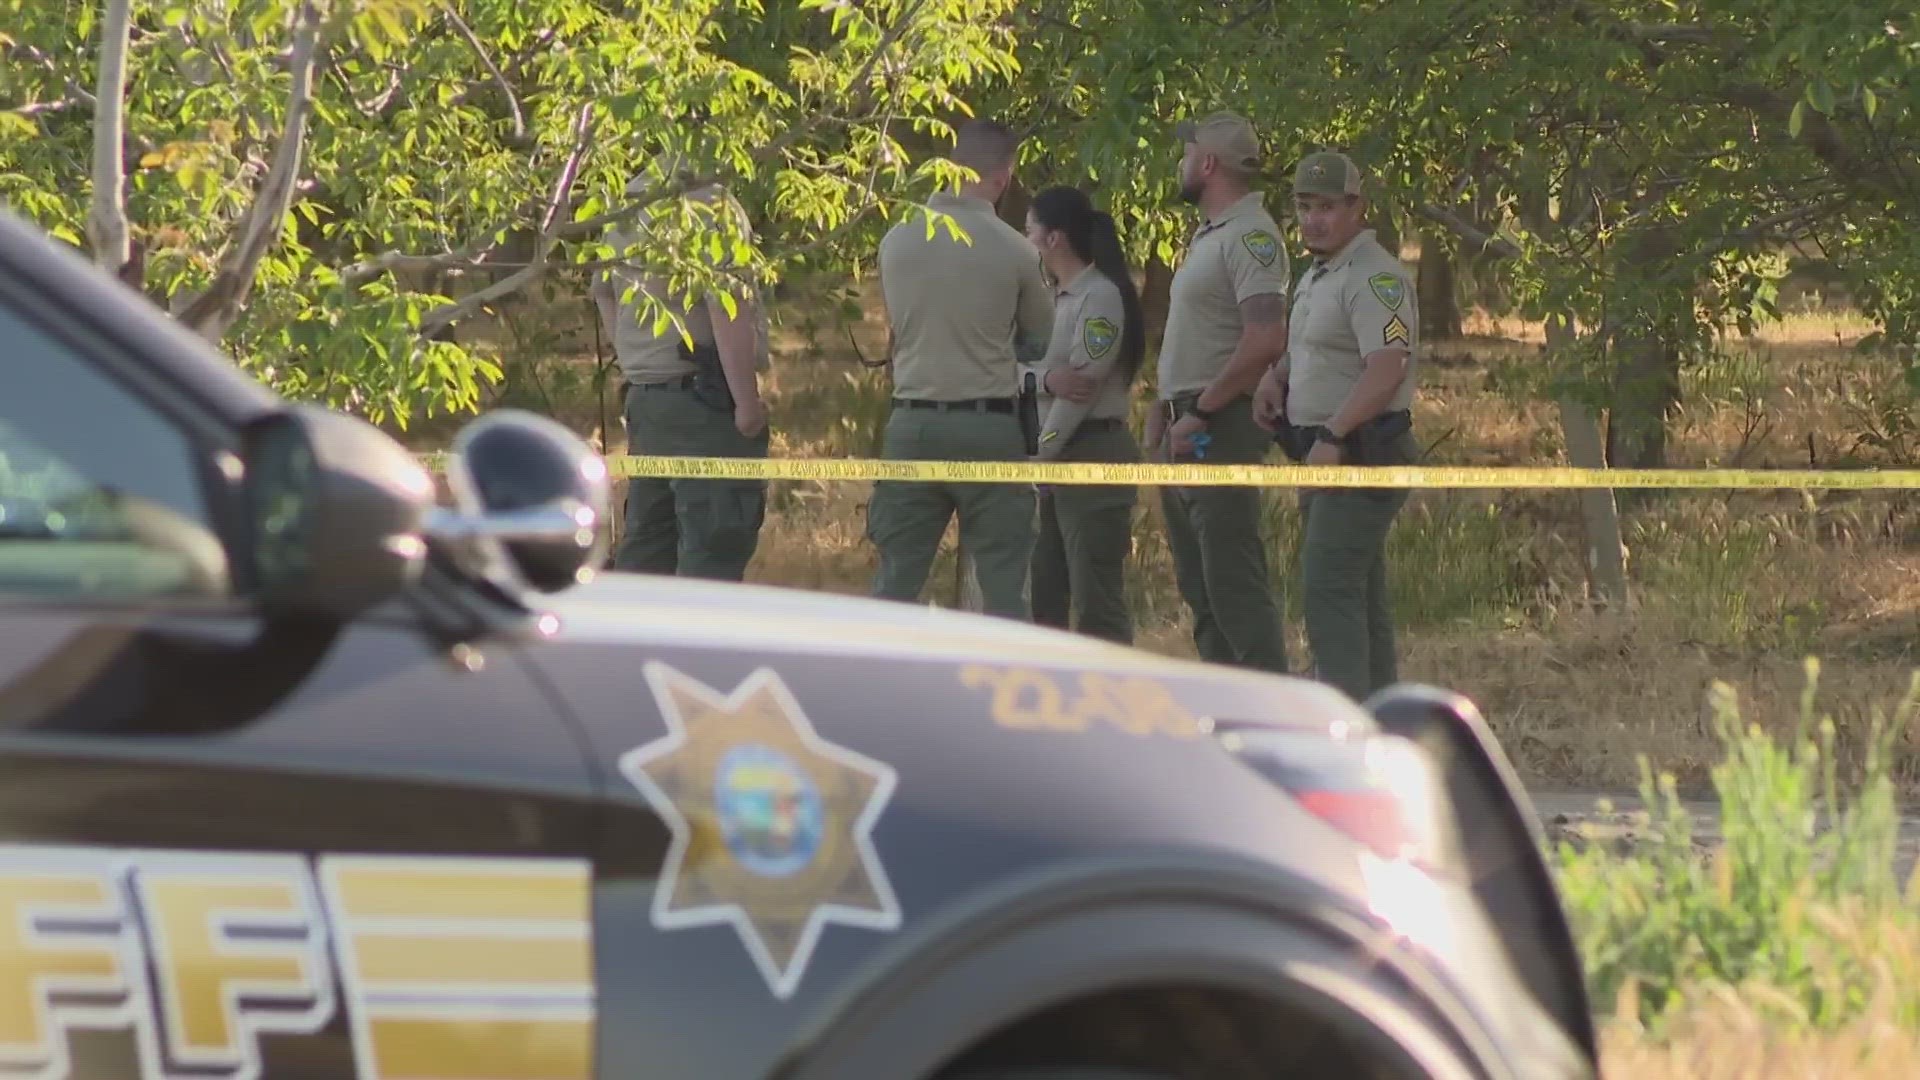 The Yuba County Sheriff's Office is investigating the woman's death as suspicious.